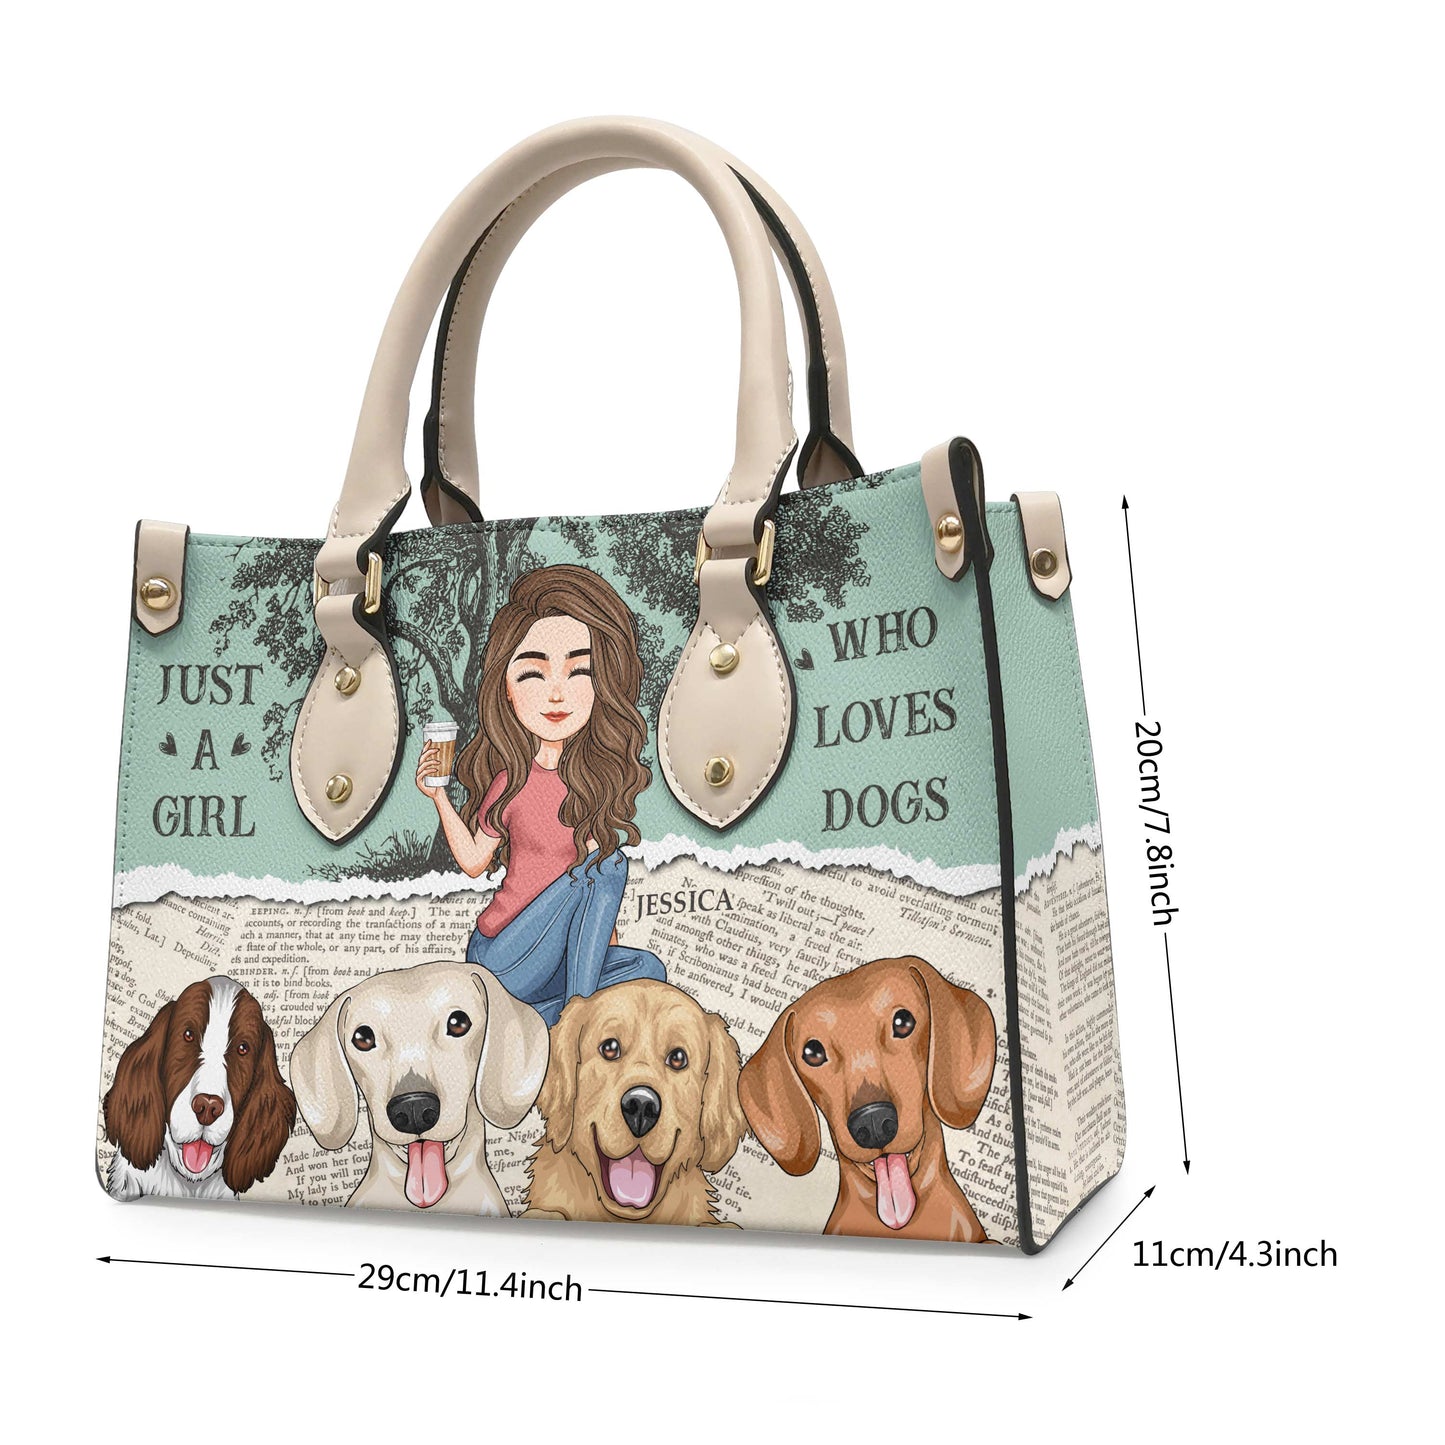 Just A Girl Who Loves Dogs - Personalized Leather Bag